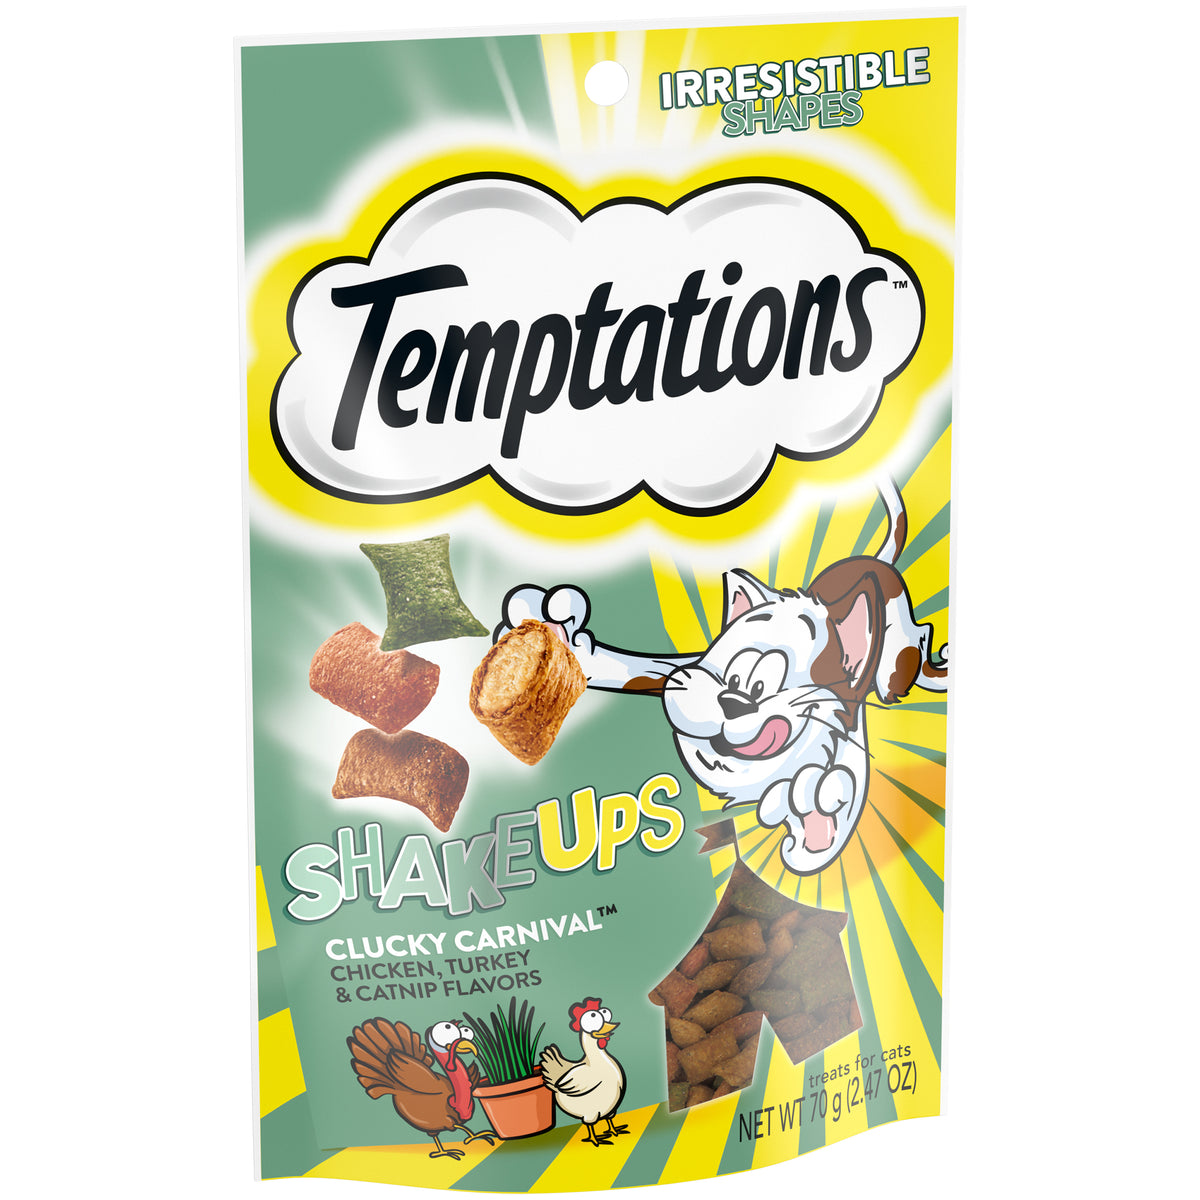 [Temptations][TEMPTATIONS ShakeUps Crunchy and Soft Cat Treats, Clucky Carnival Flavor, 2.47 oz. Pouch][Image Center Left (3/4 Angle)]